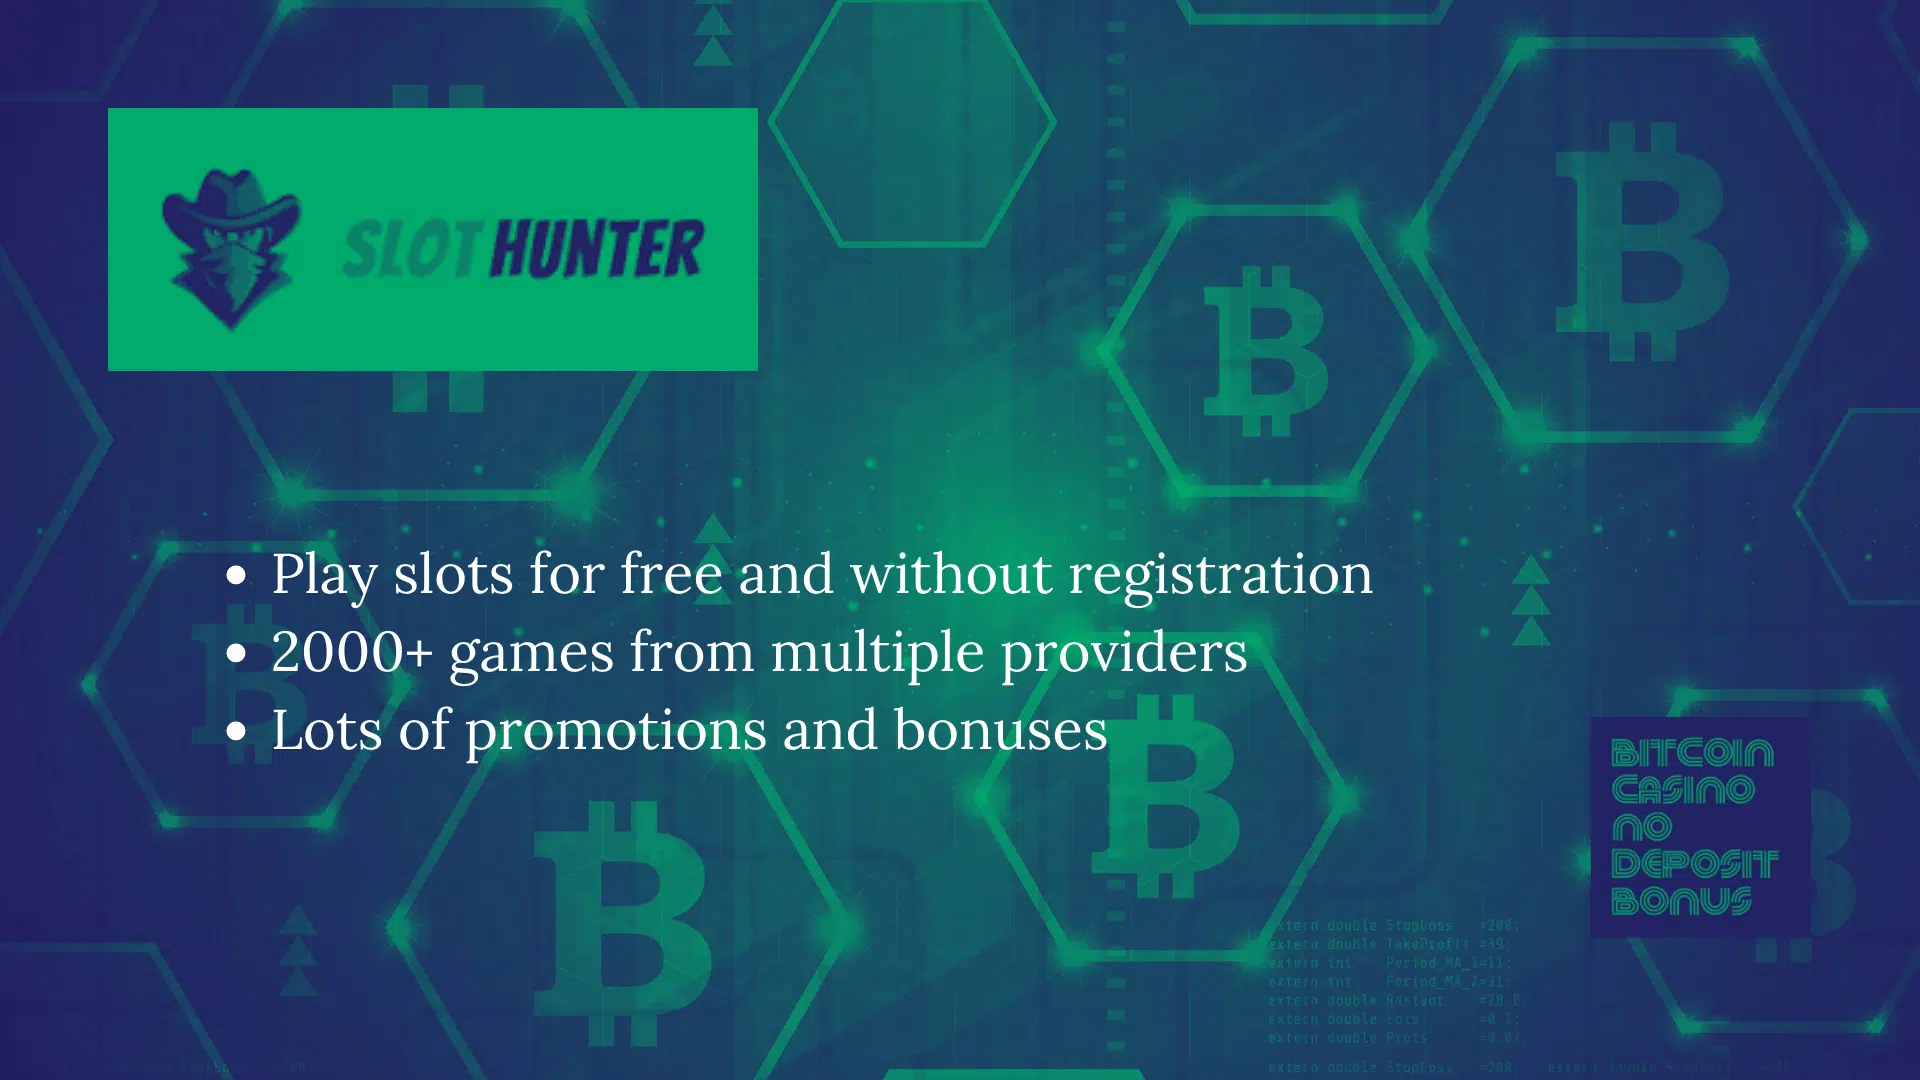 You are currently viewing Slot Hunter Casino Bonus Codes – SlotHunter.com Free Spins December 2022